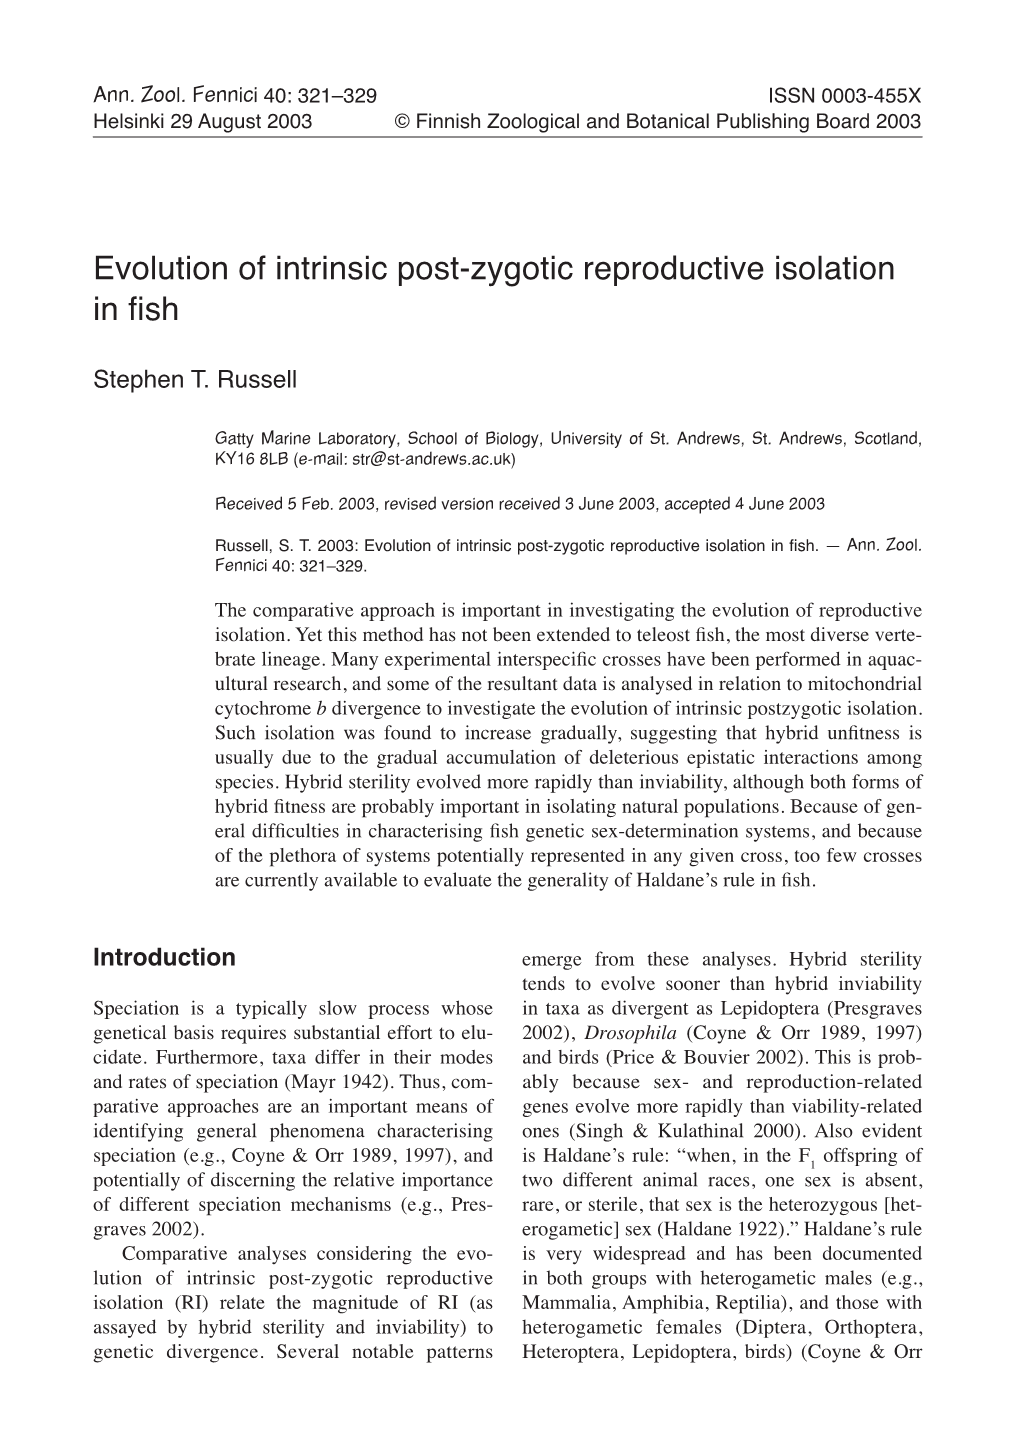 Evolution of Intrinsic Post-Zygotic Reproductive Isolation in Fish